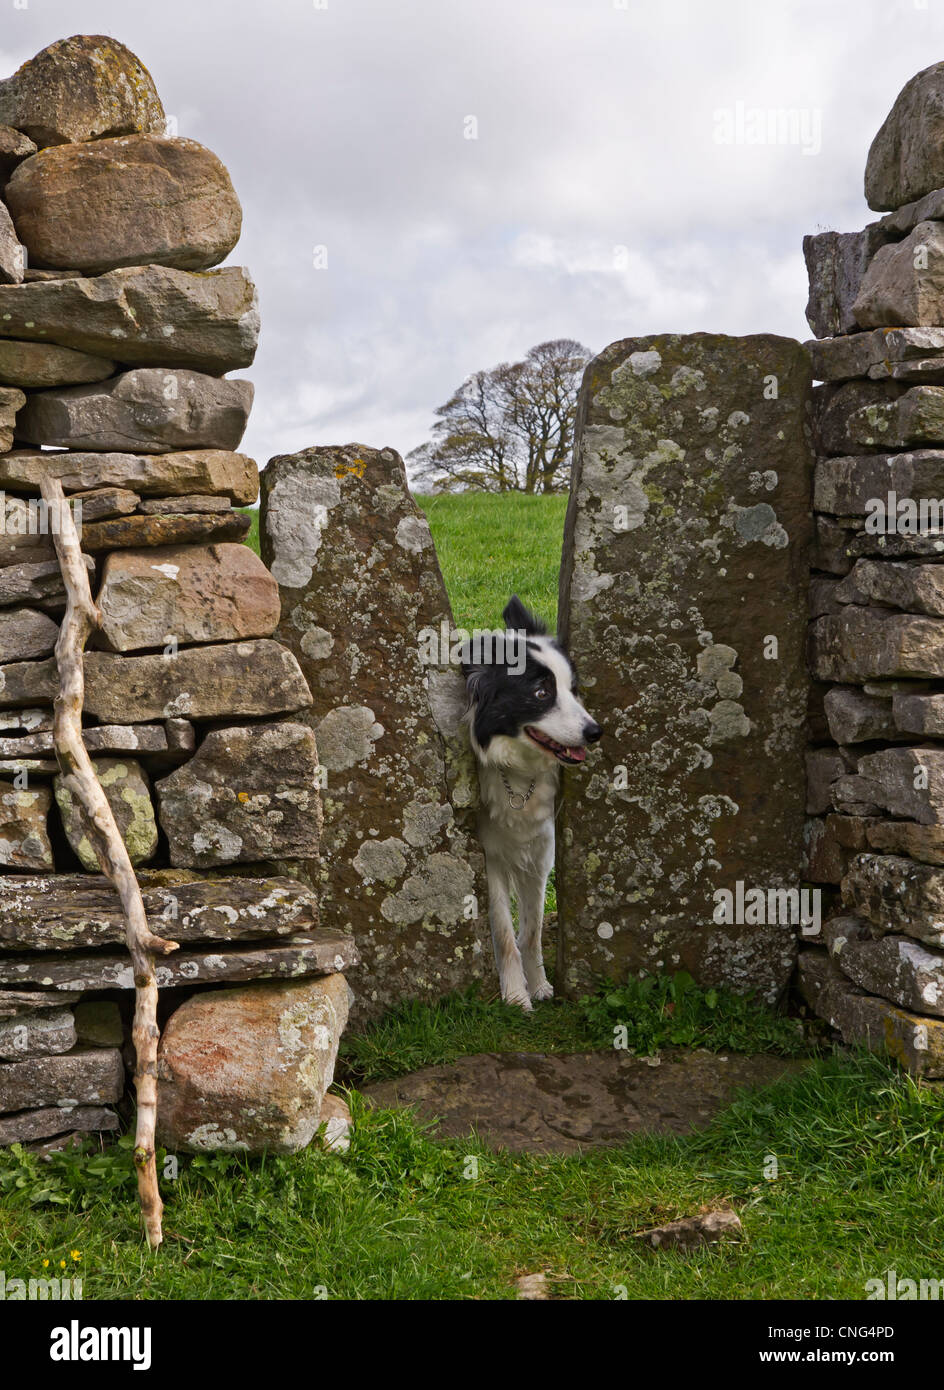 A squeeze stile in a dry stone wall in the Yorkshire dales. Very narrow - a Border Collie struggles to get through it. Stock Photo